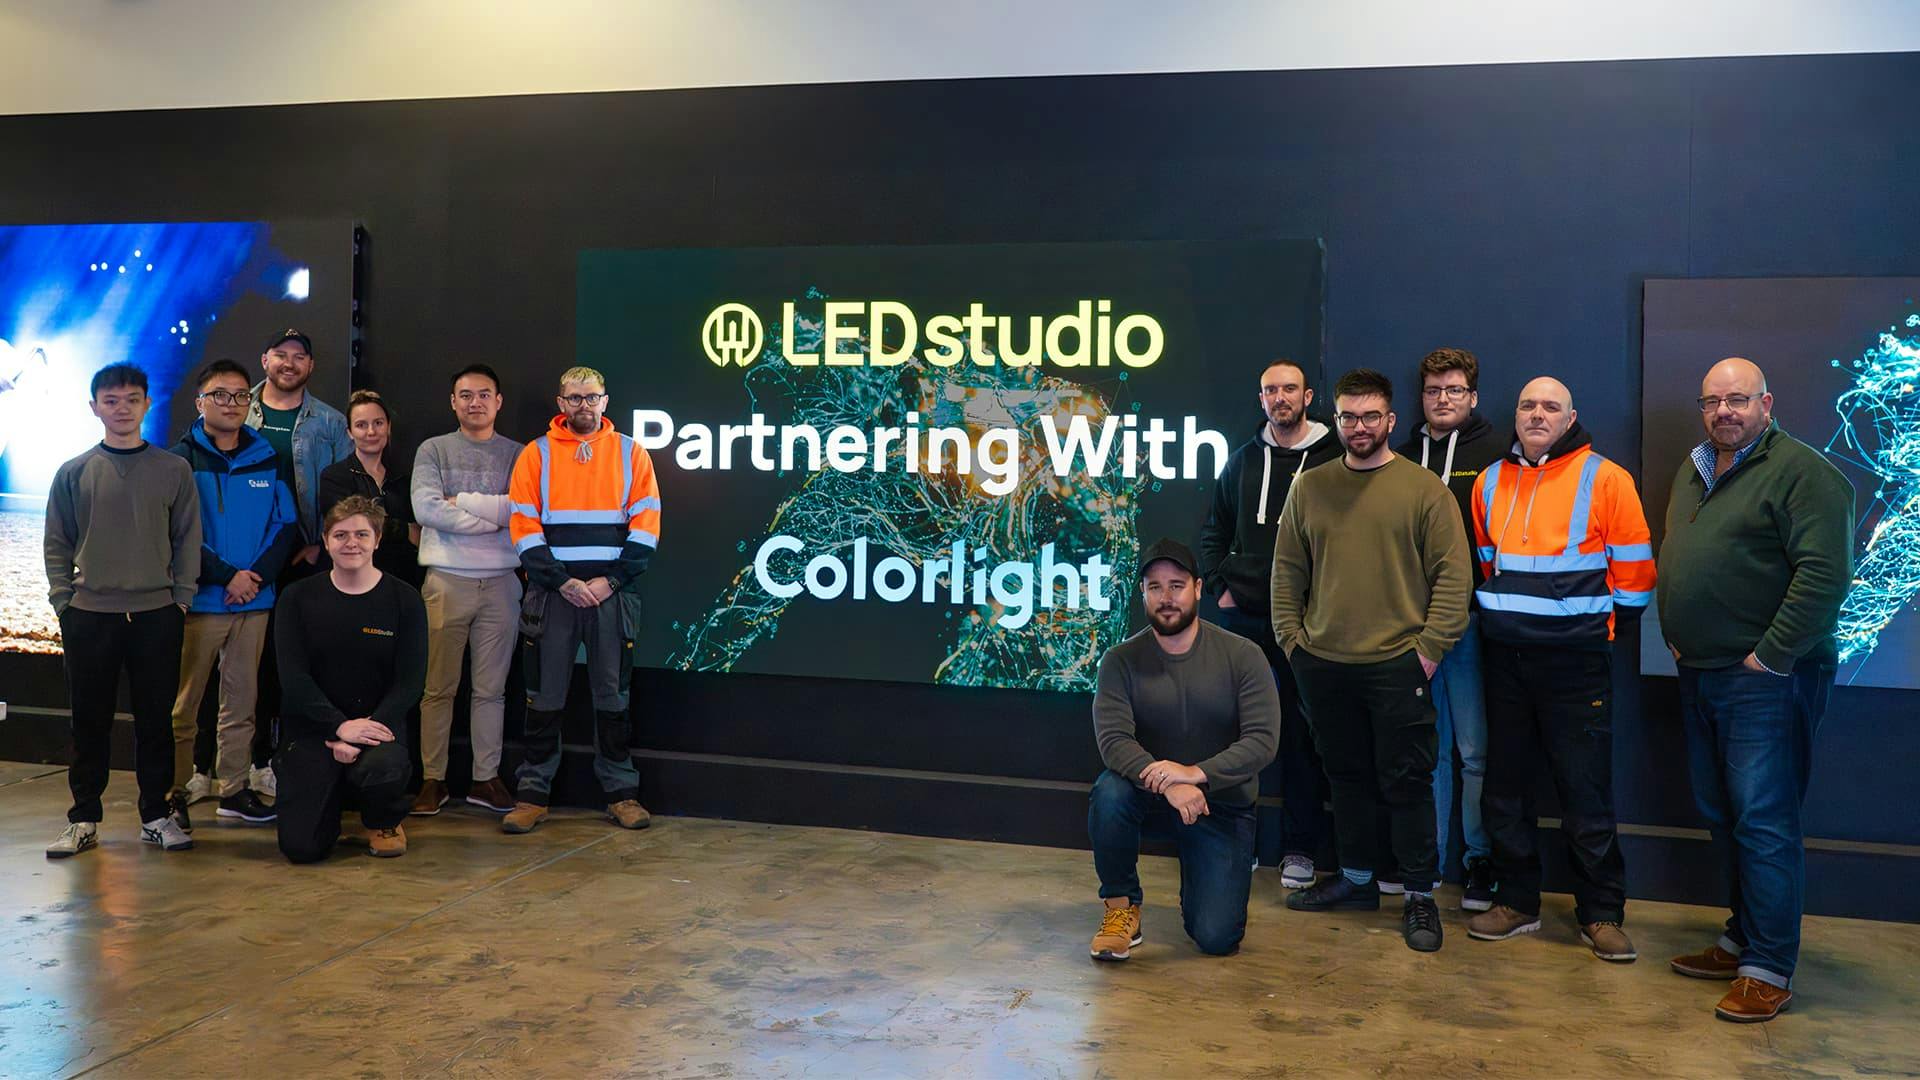 The LED Studio partnering with Colorlight, blog Banner, staff training, LED processors